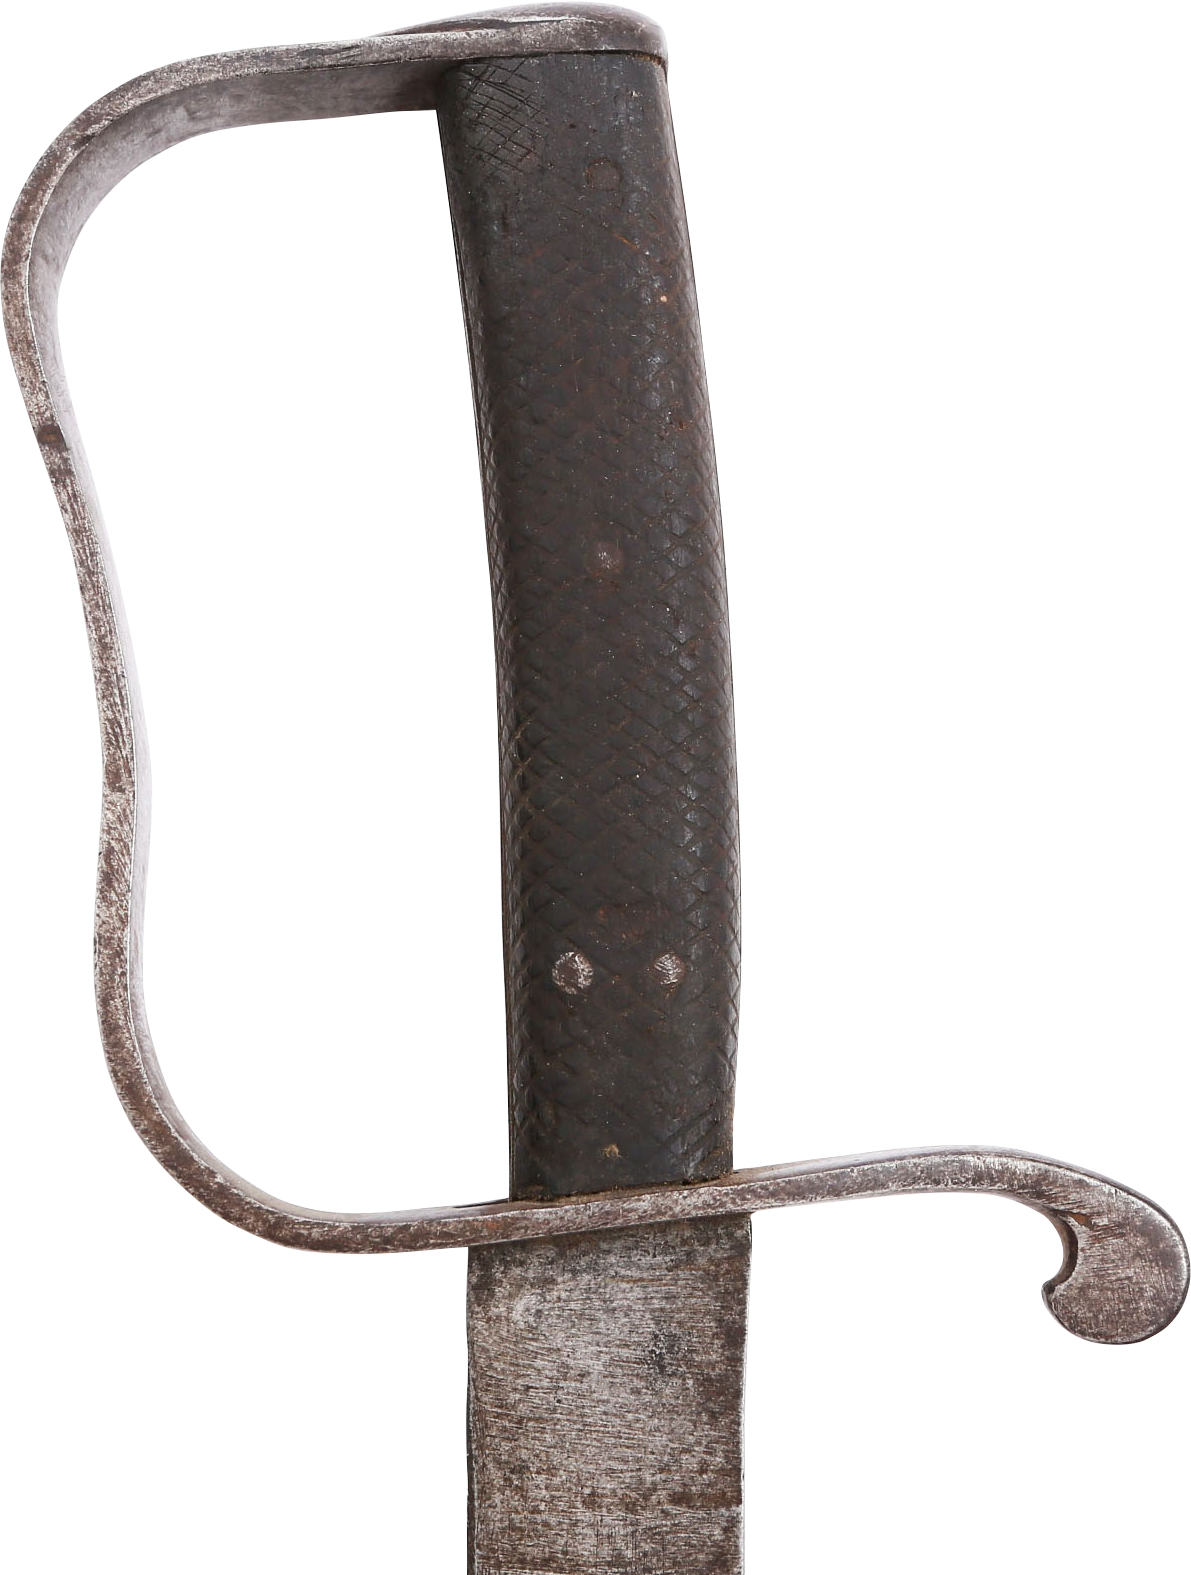 INDIAN INFANTRY SWORD, MID 19TH CENTURY - Fagan Arms